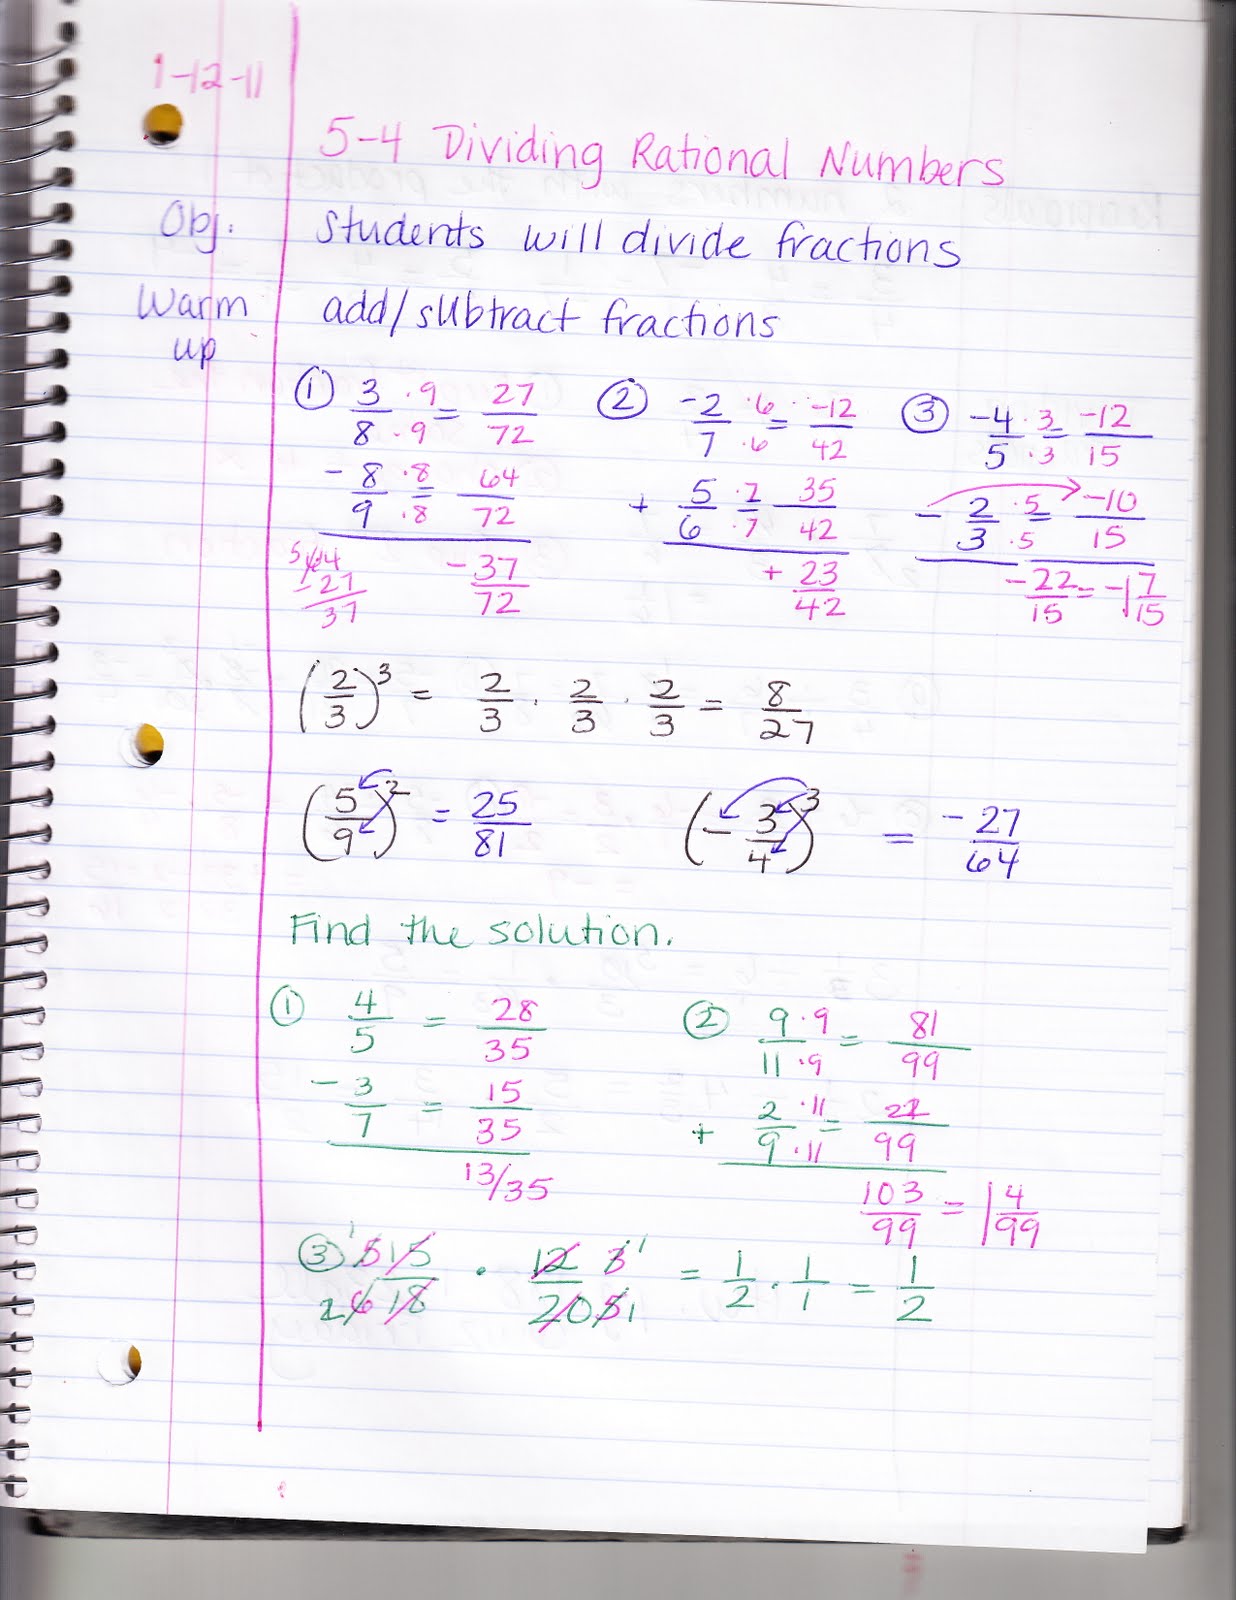 ms-jean-s-algebra-readiness-blog-5-4-dividing-rational-numbers